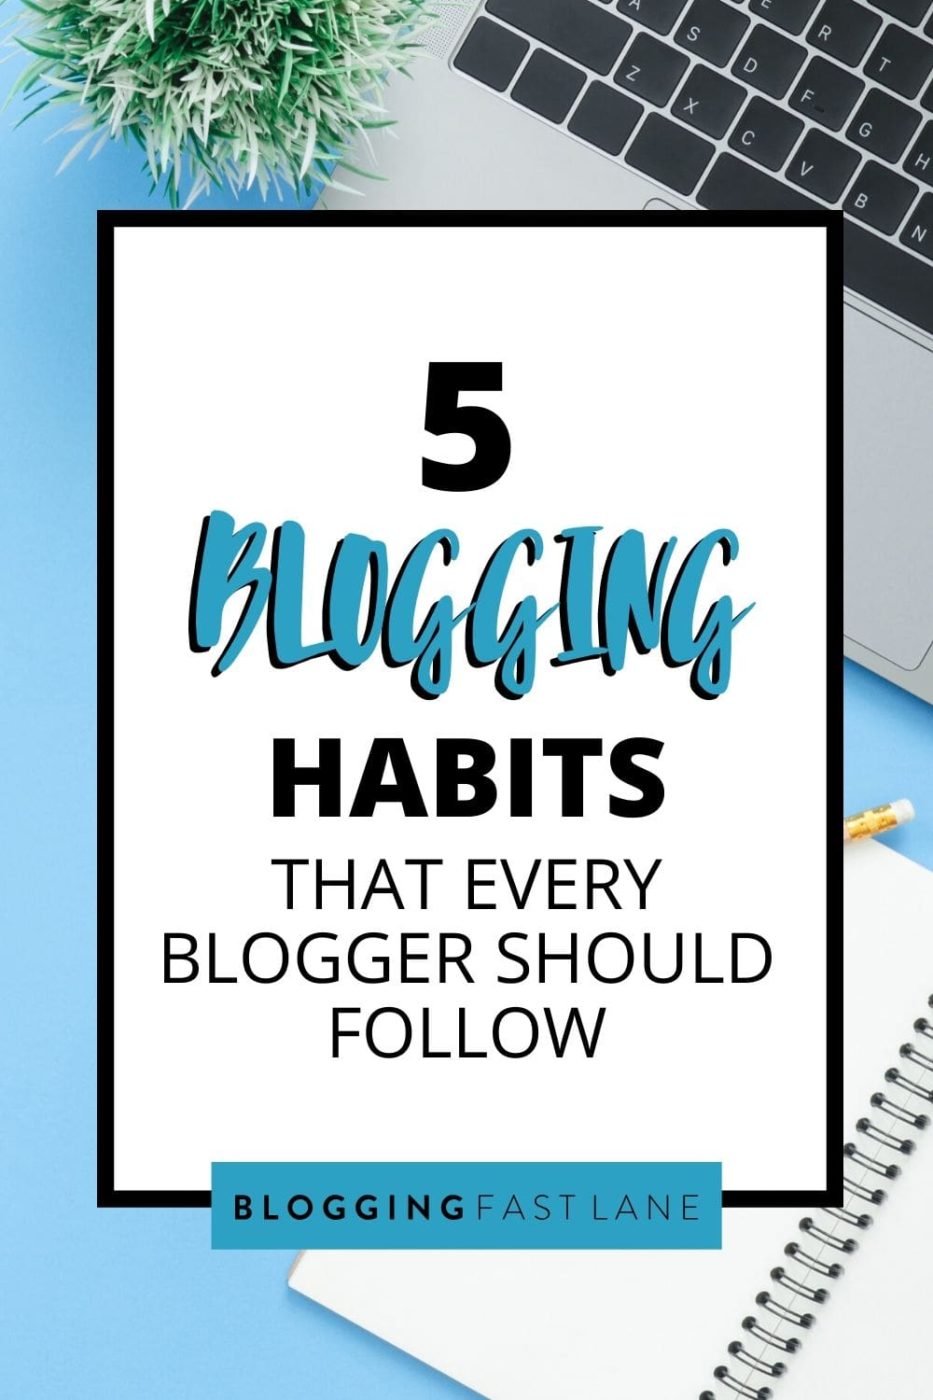 Habits For Bloggers | To succeed in blogging, all bloggers must have these 5 habits. Click to find out what they are!